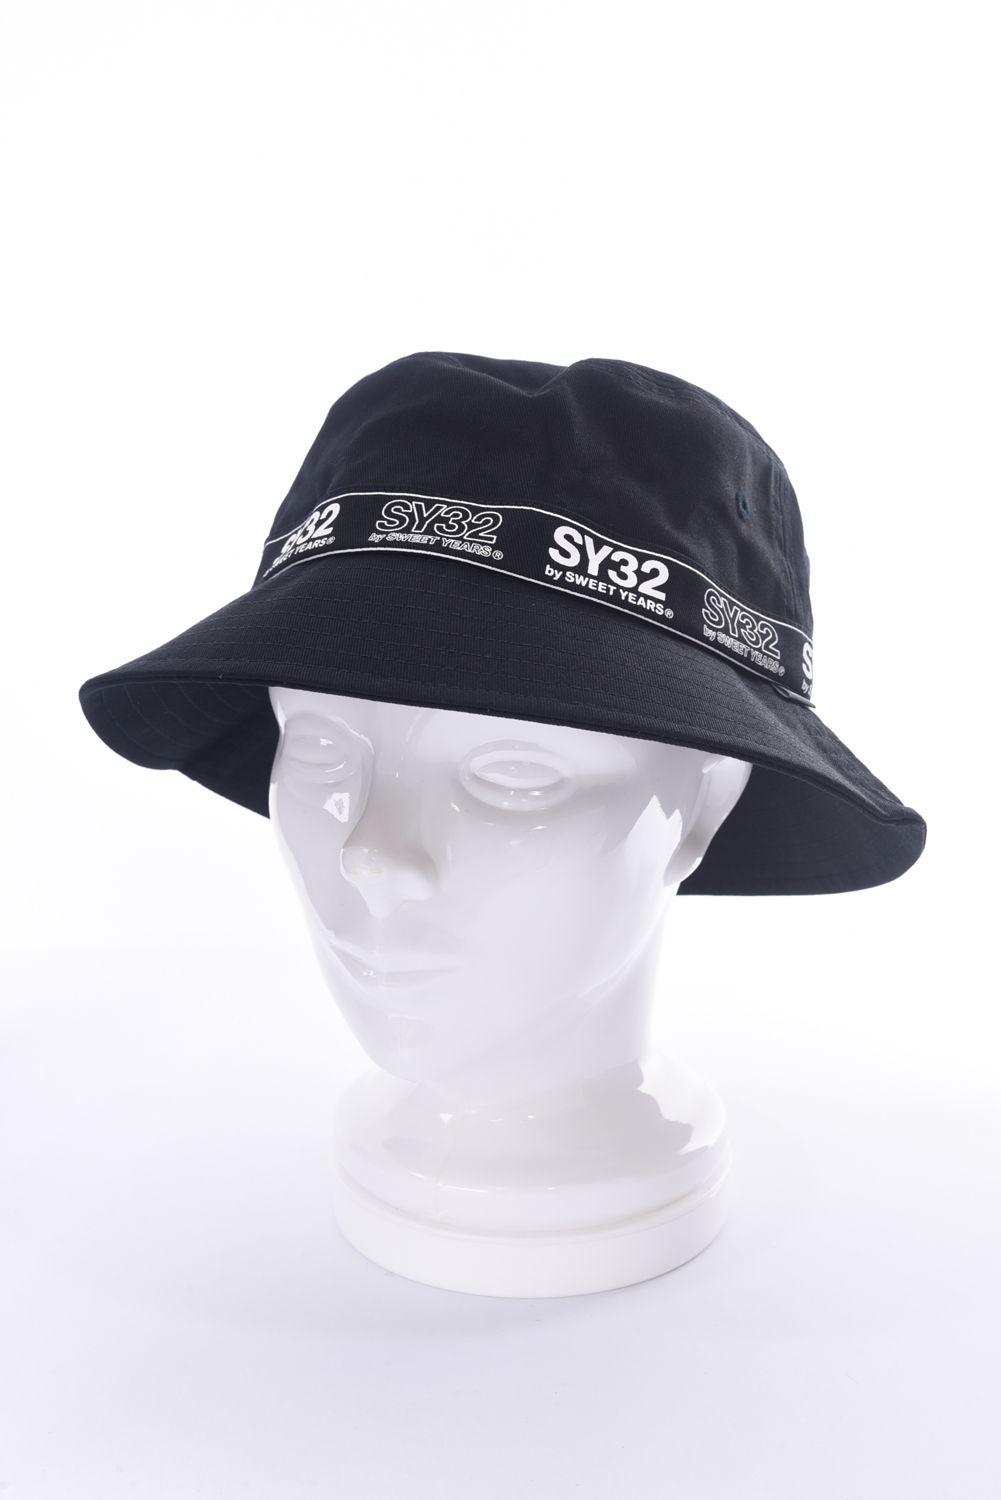 SY32 by SWEET YEARS GOLF - TAPE LOGO BUCKET HAT / ロゴラインテープ